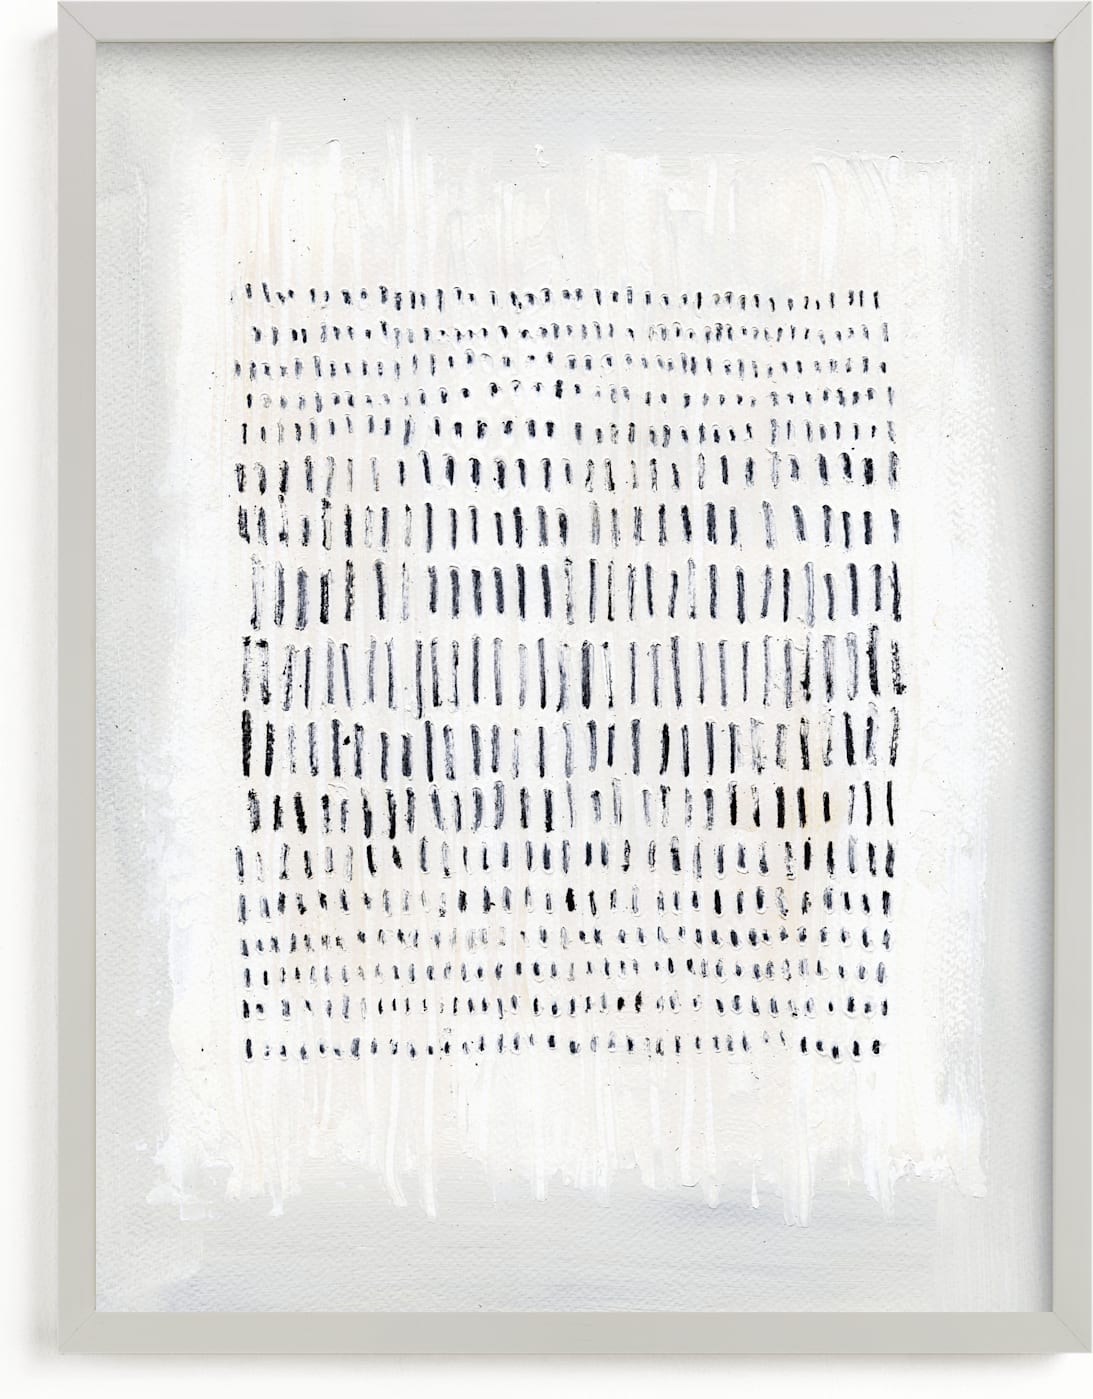 This is a white, grey, black art by Khara Ledonne called Weaving Toward One Another.